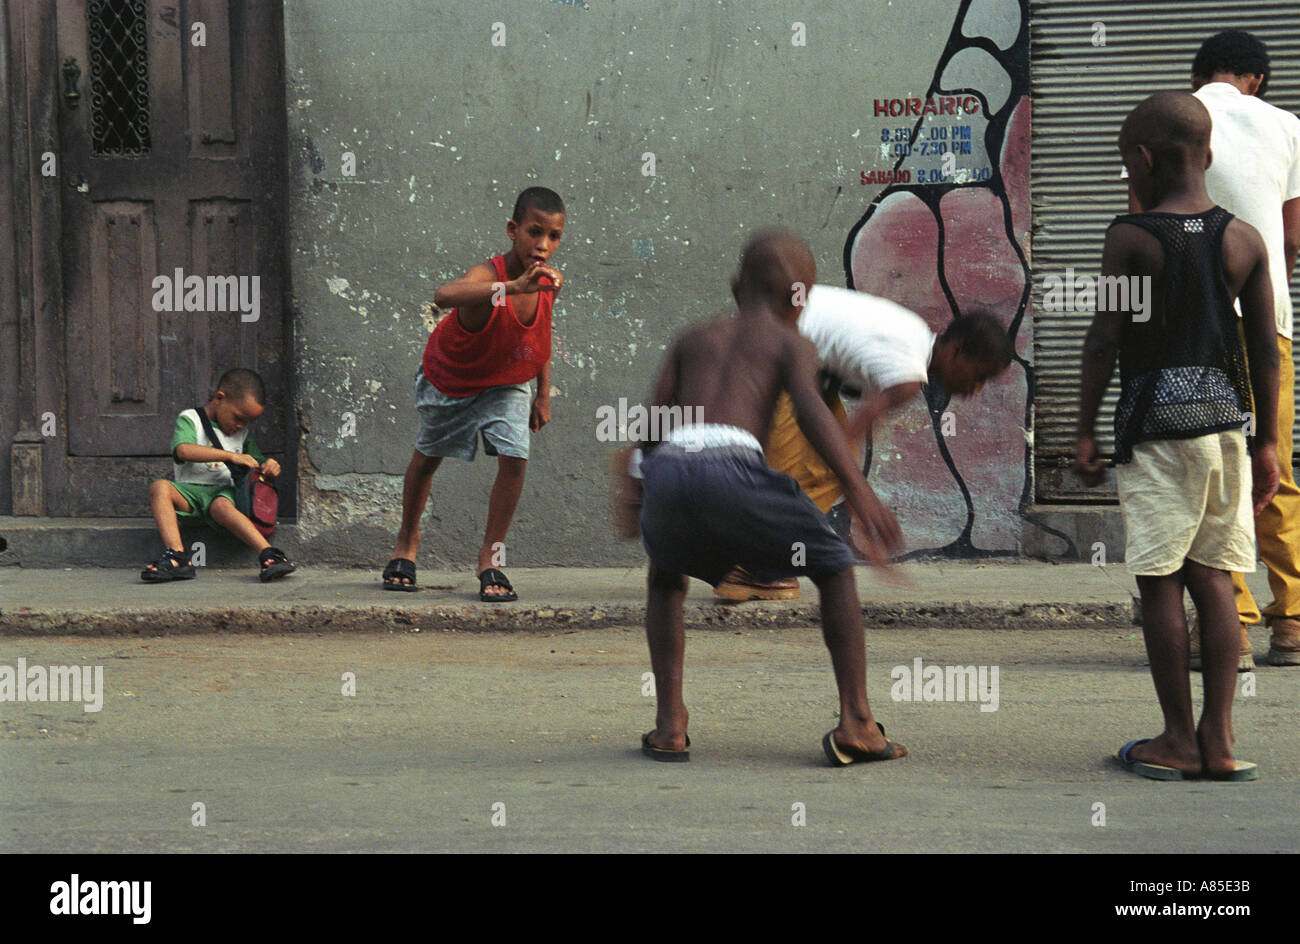 Young cuban boys in streets of Central havana participate in game of marbles as spectators watch seated on doorsteps Stock Photo